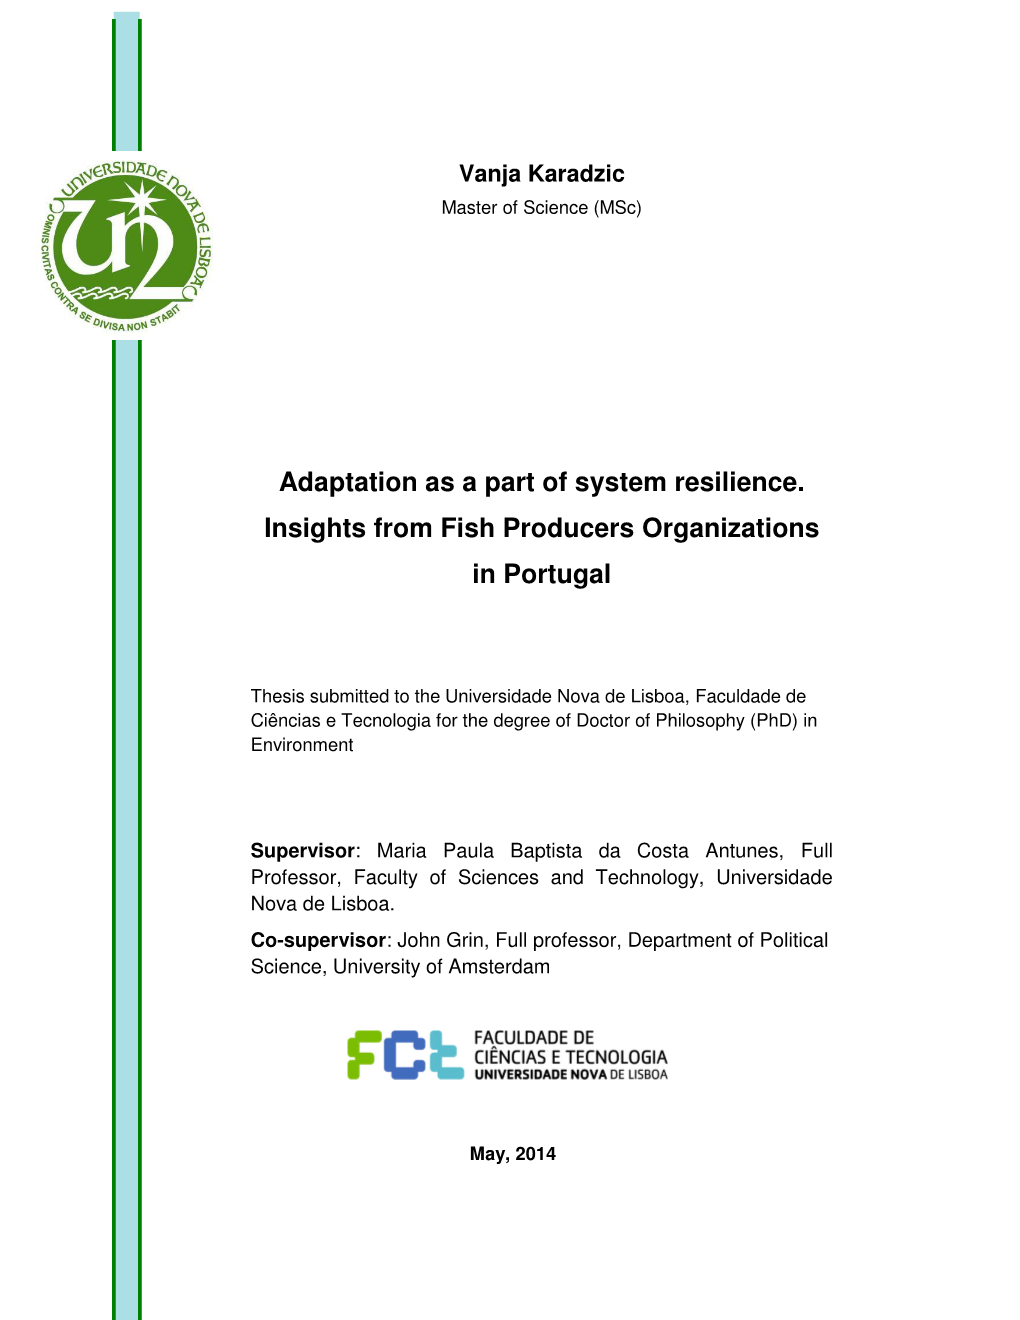 Adaptation As a Part of System Resilience. Insights from Fish Producers Organizations in Portugal